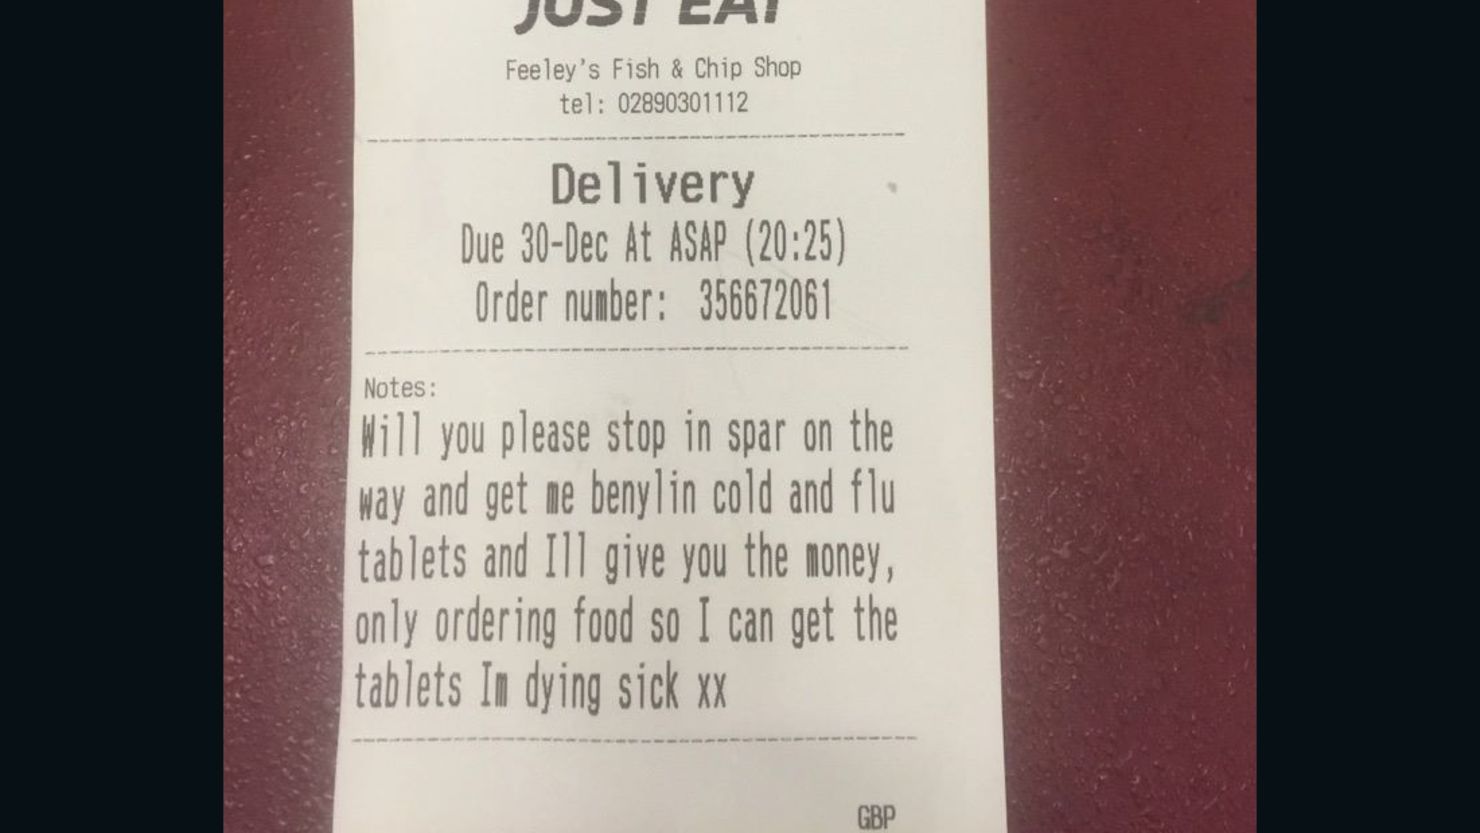 A customer of Feeley's Fish and Chip Shop in Belfast had an unusual request.